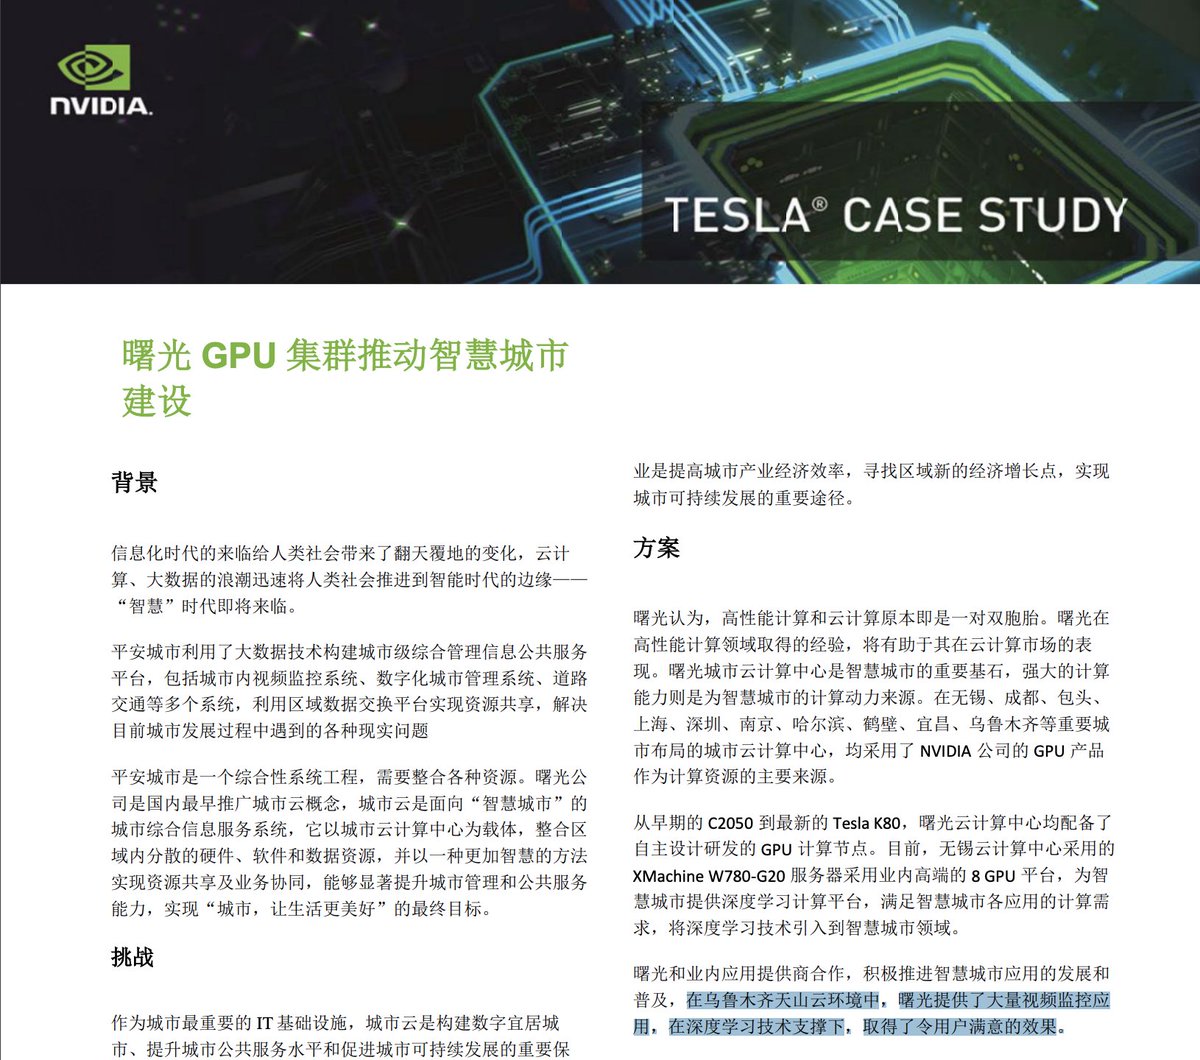 Intel and Nvidia said they were unaware of the supercomputer's uses, though there's plenty of public documentation. In 2015 marketing material Nvidia said the Urumqi computing system's surveillance applications had led to high customer satisfaction.